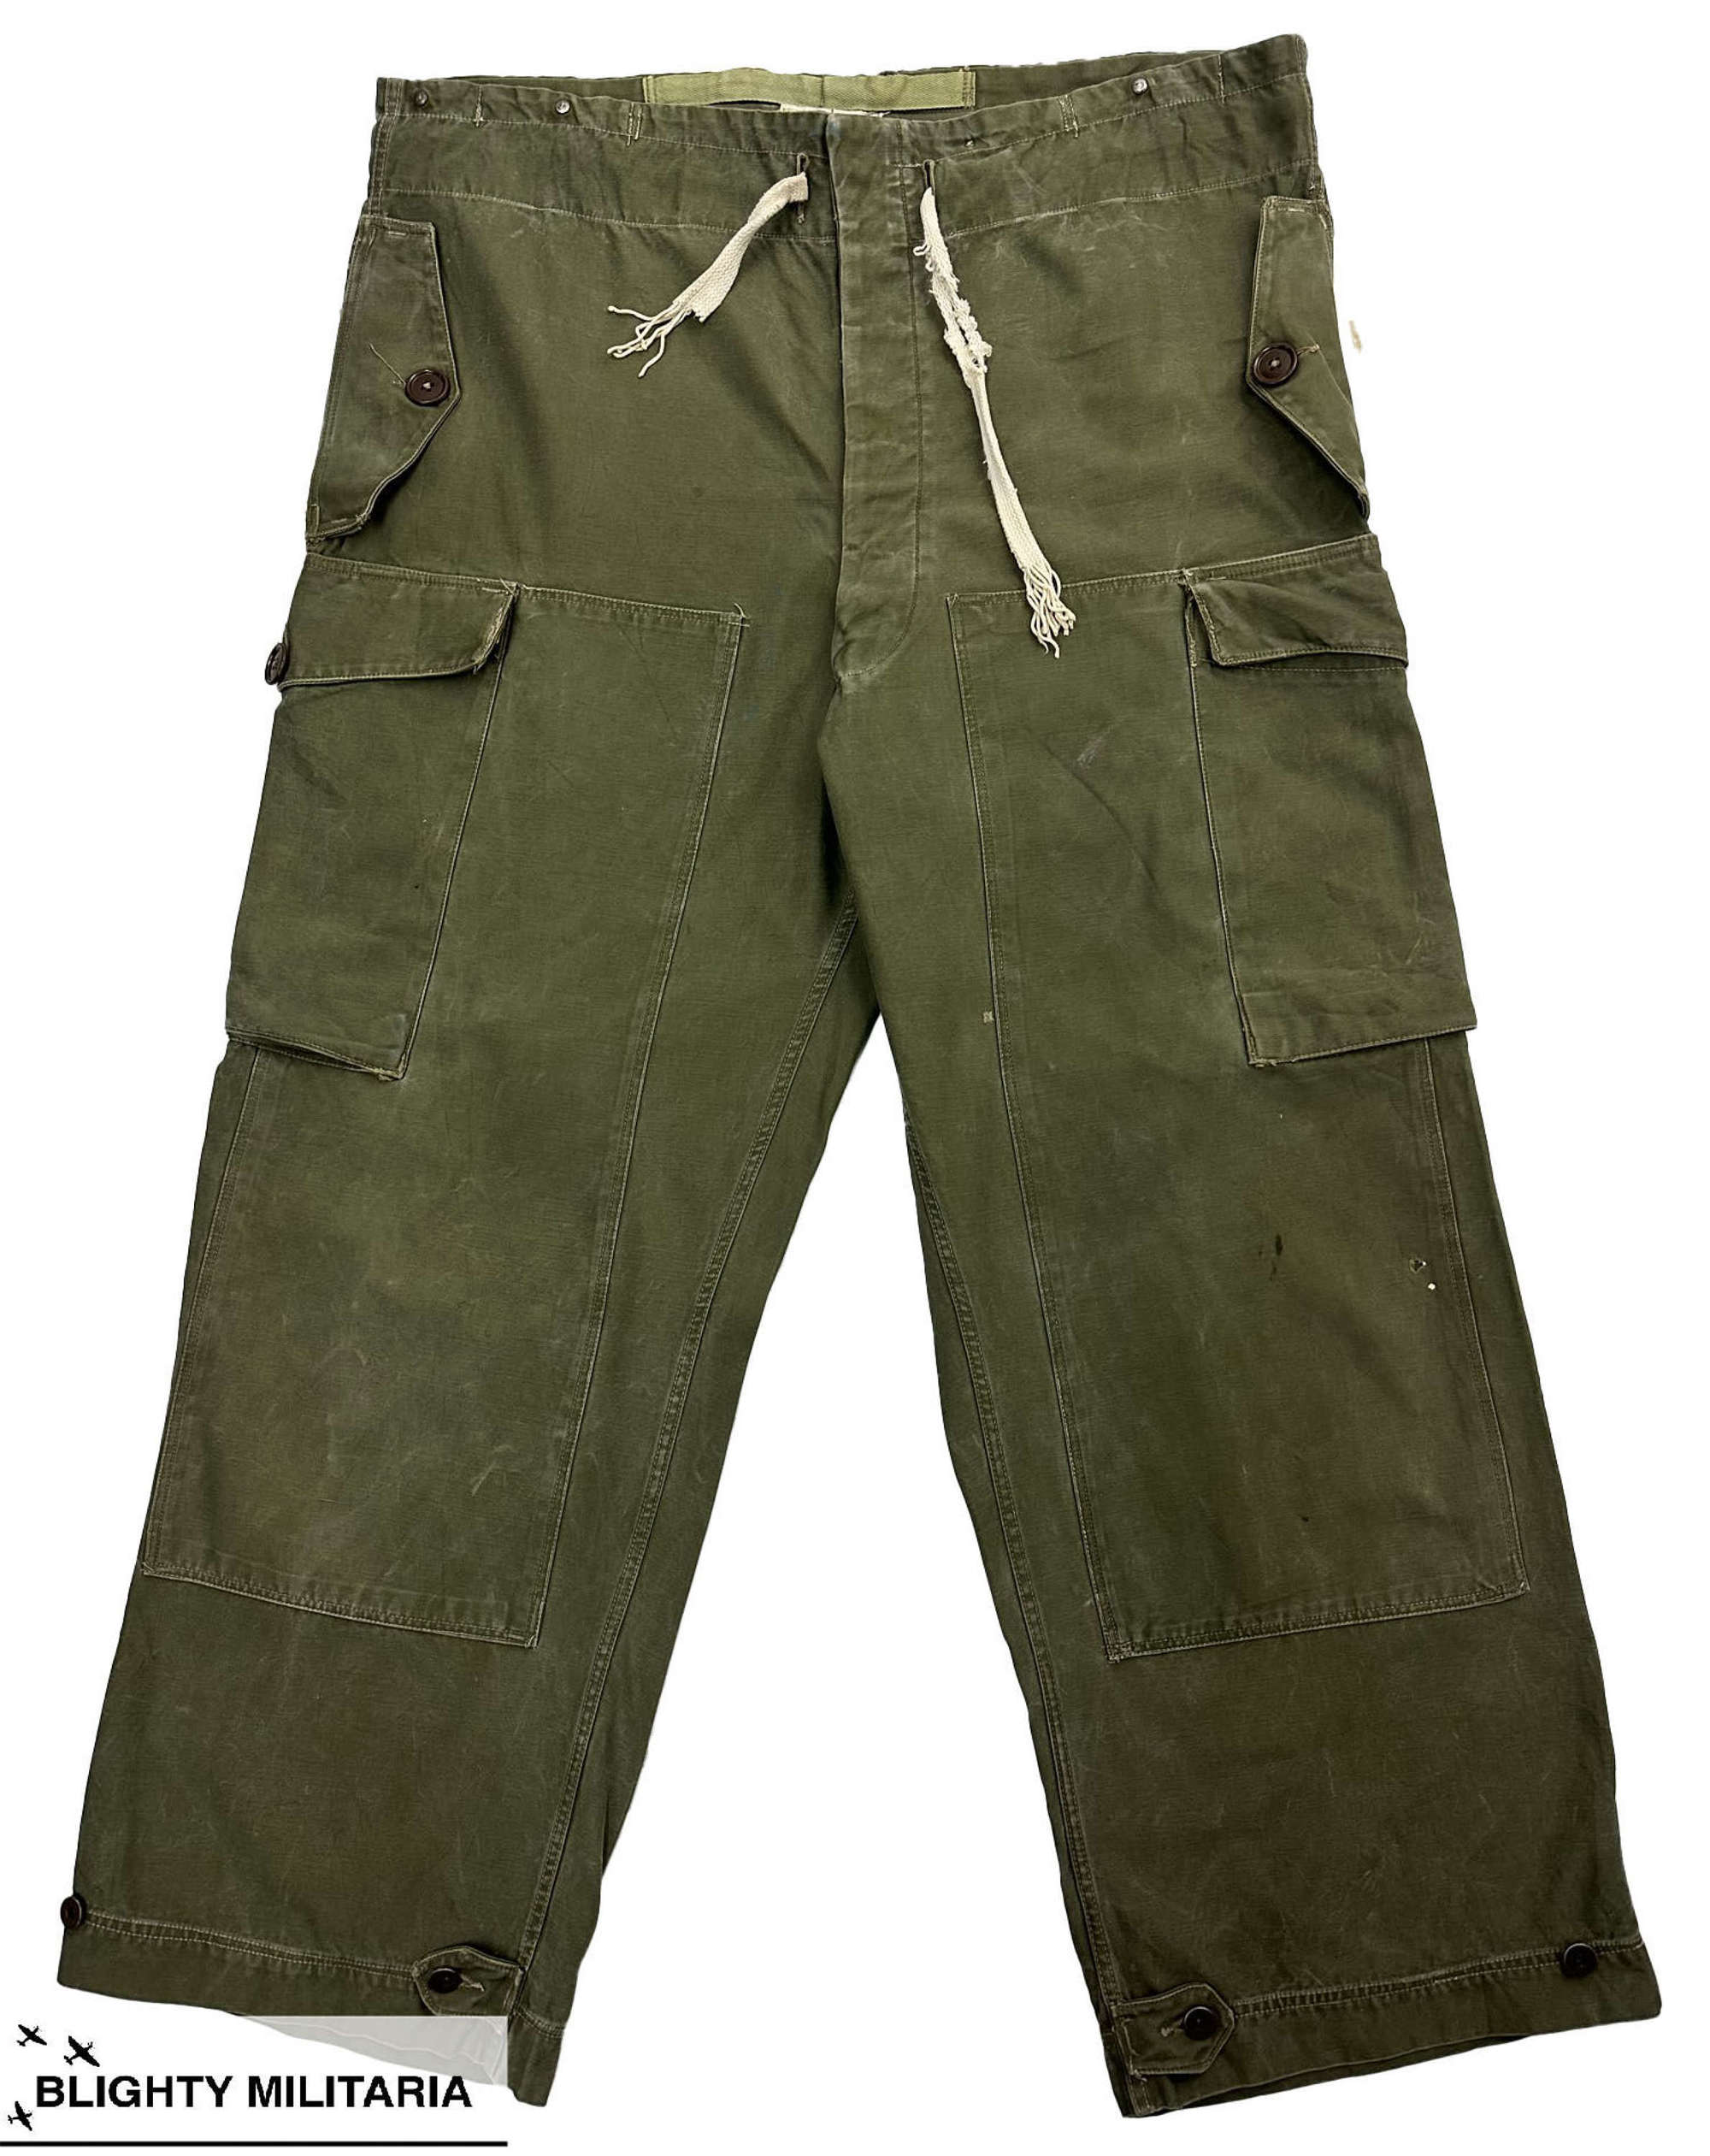 Original 1949 Dated Canadian Army Experimental Pattern Trousers